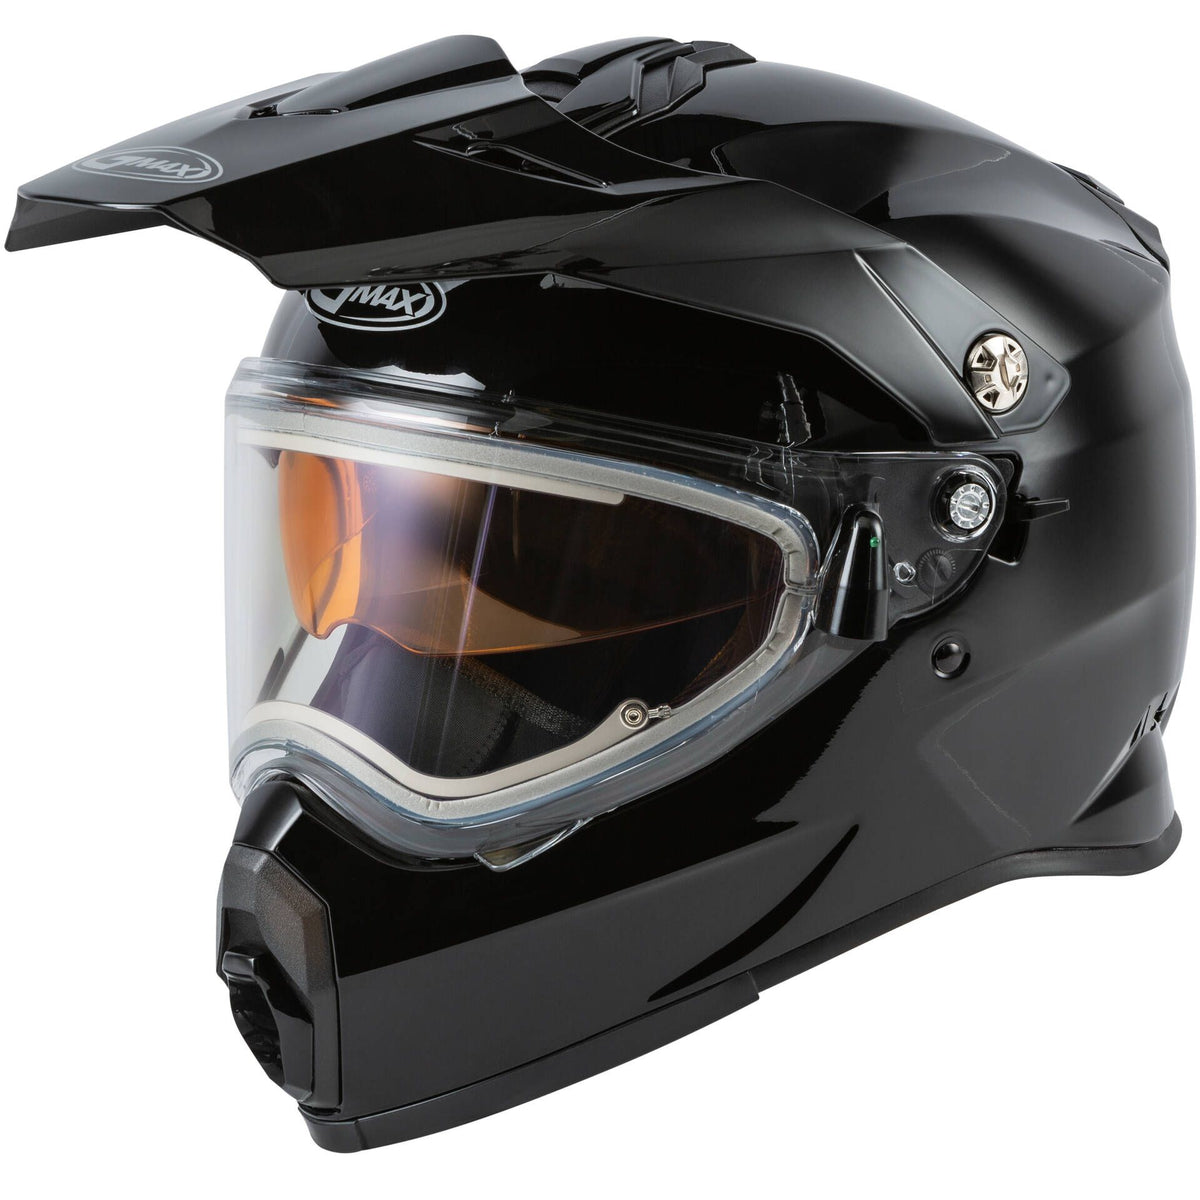 Gmax At-21 Solid Snow Touring Helmet with Electric Lens Shield